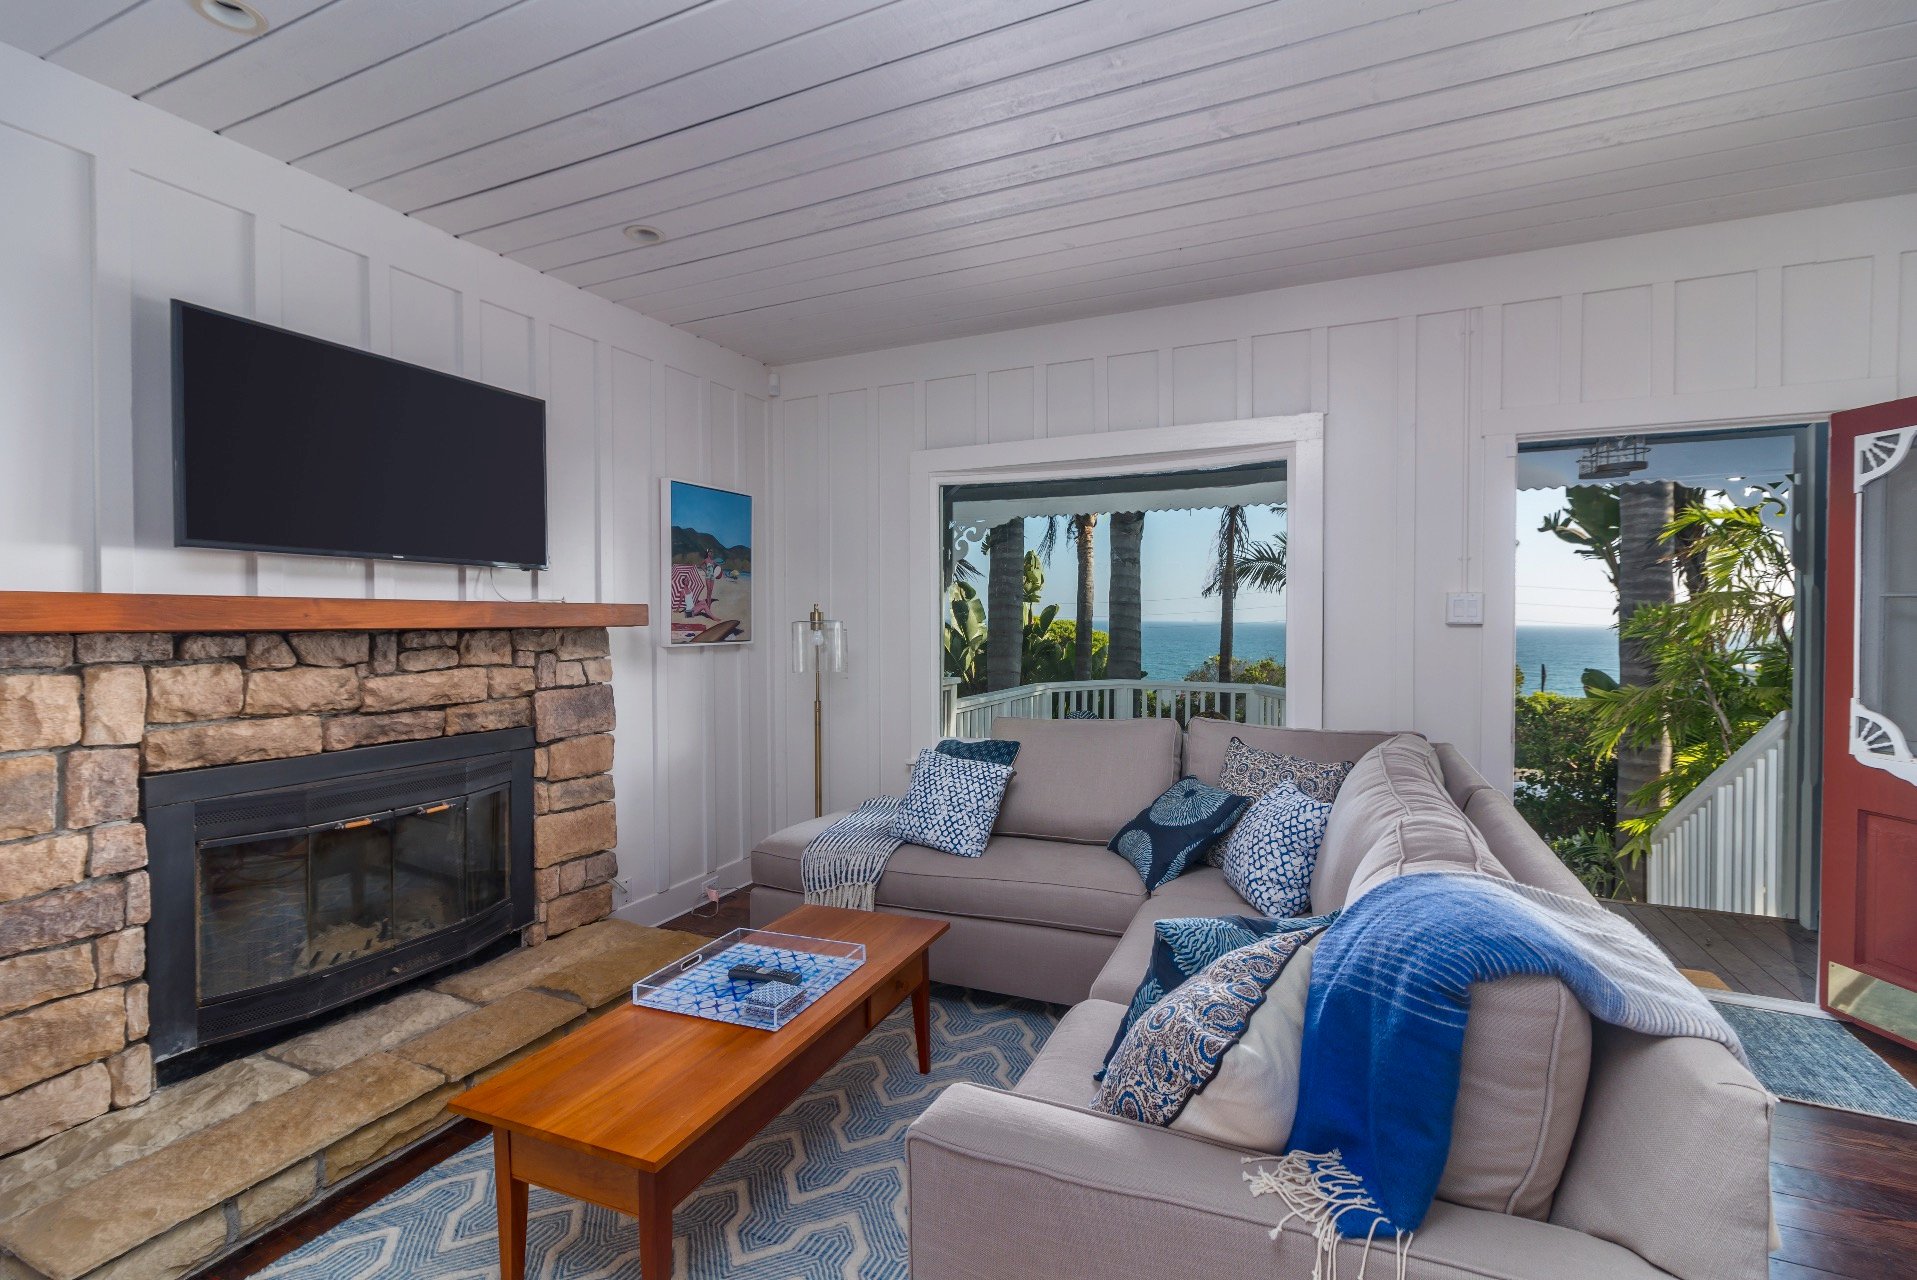 Cozy Living room with flat-screen TV and ocean views.